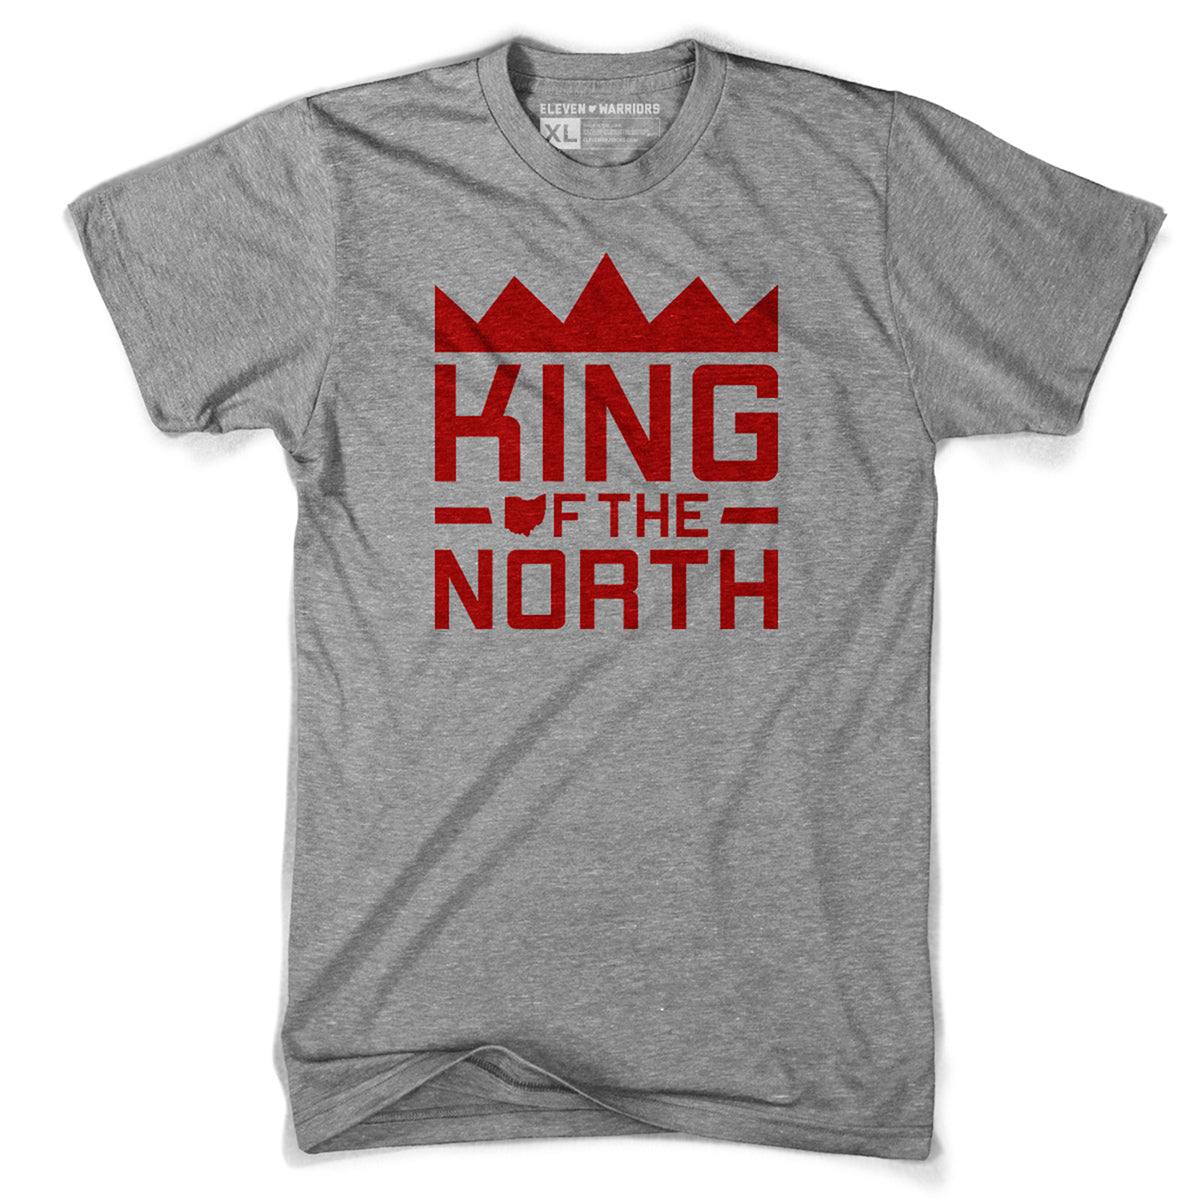 King of the North Tee